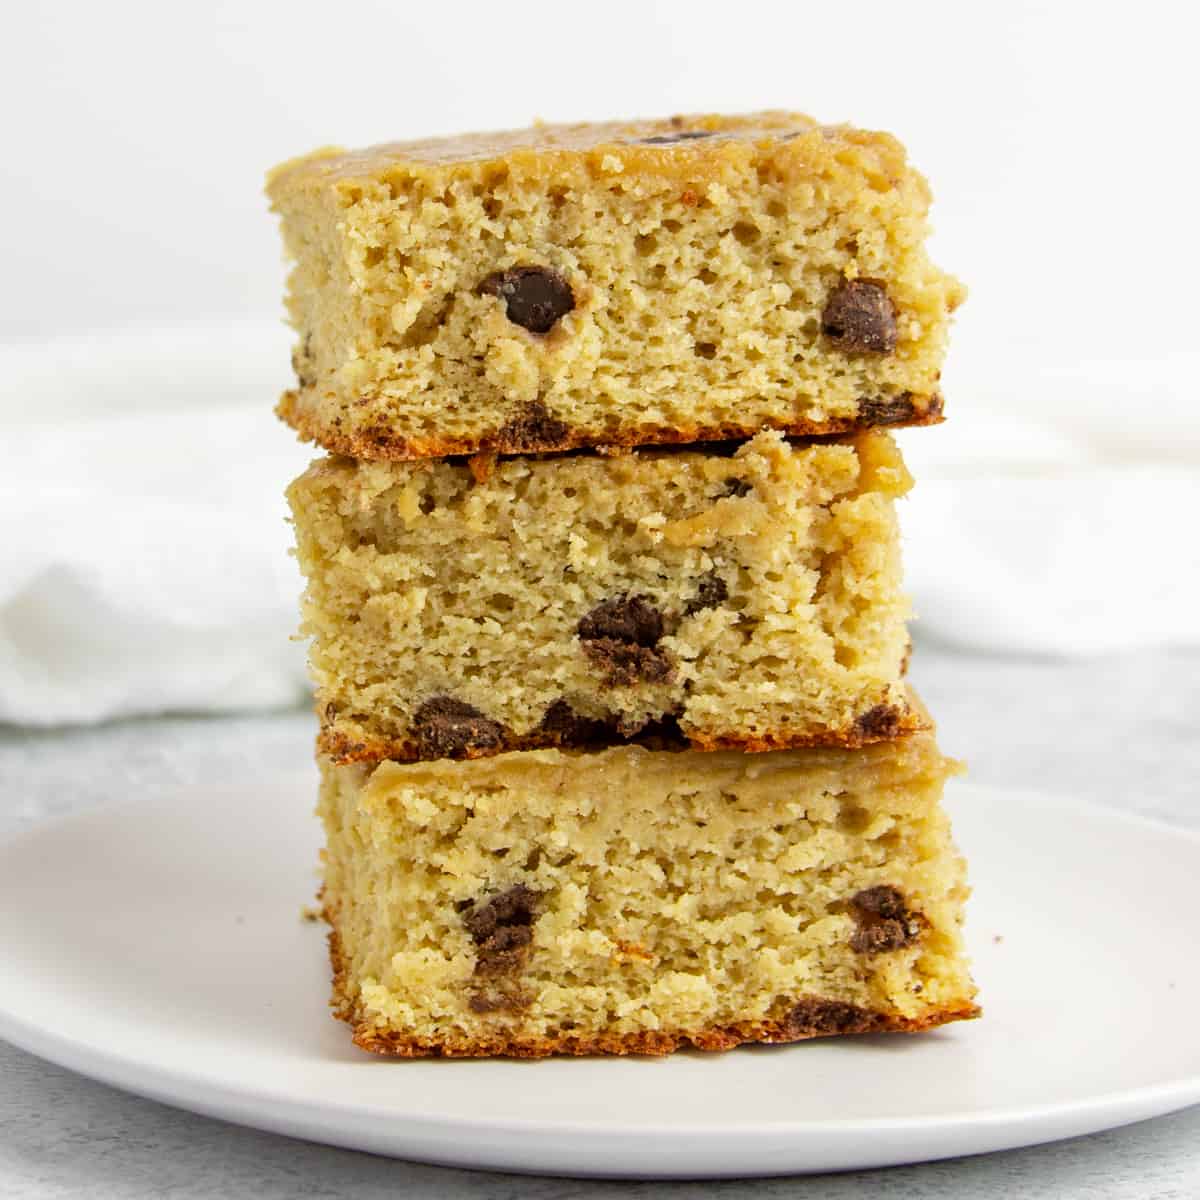 stack of three squares of vanilla chocolate chip protein snack cake on a white plate